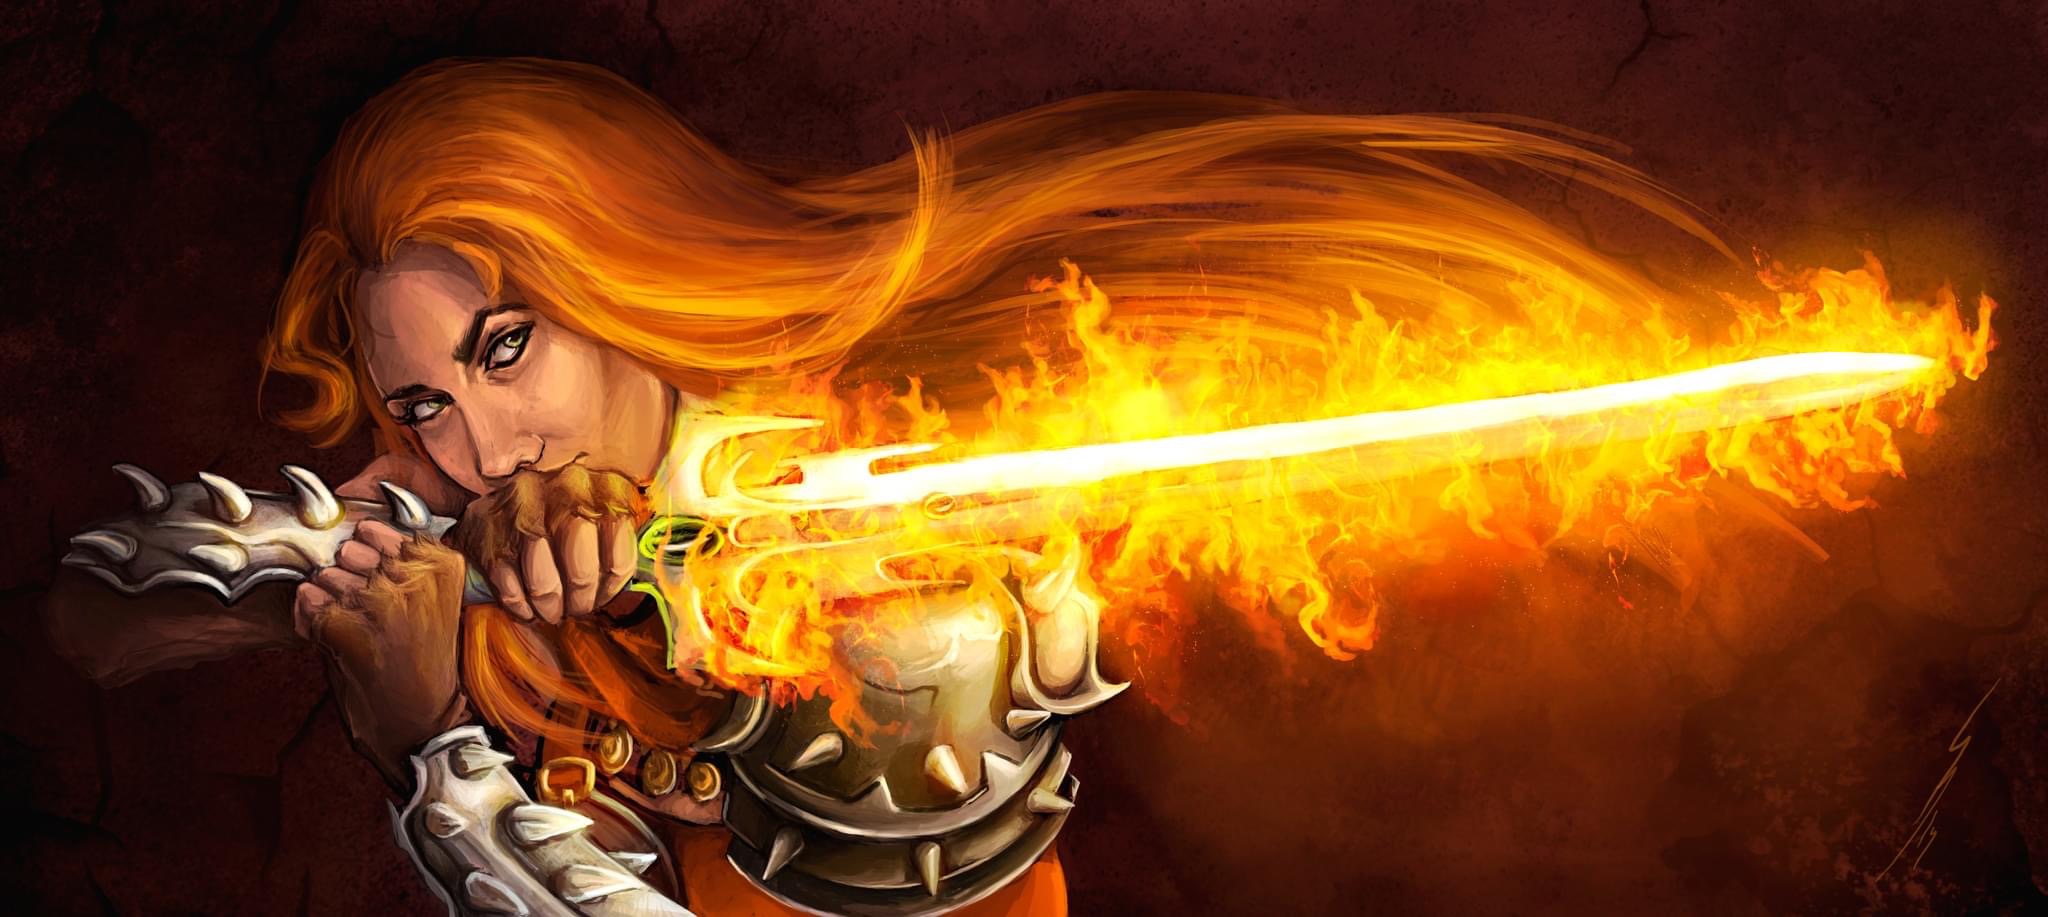 Woman in plate with long hair and a flame blade!